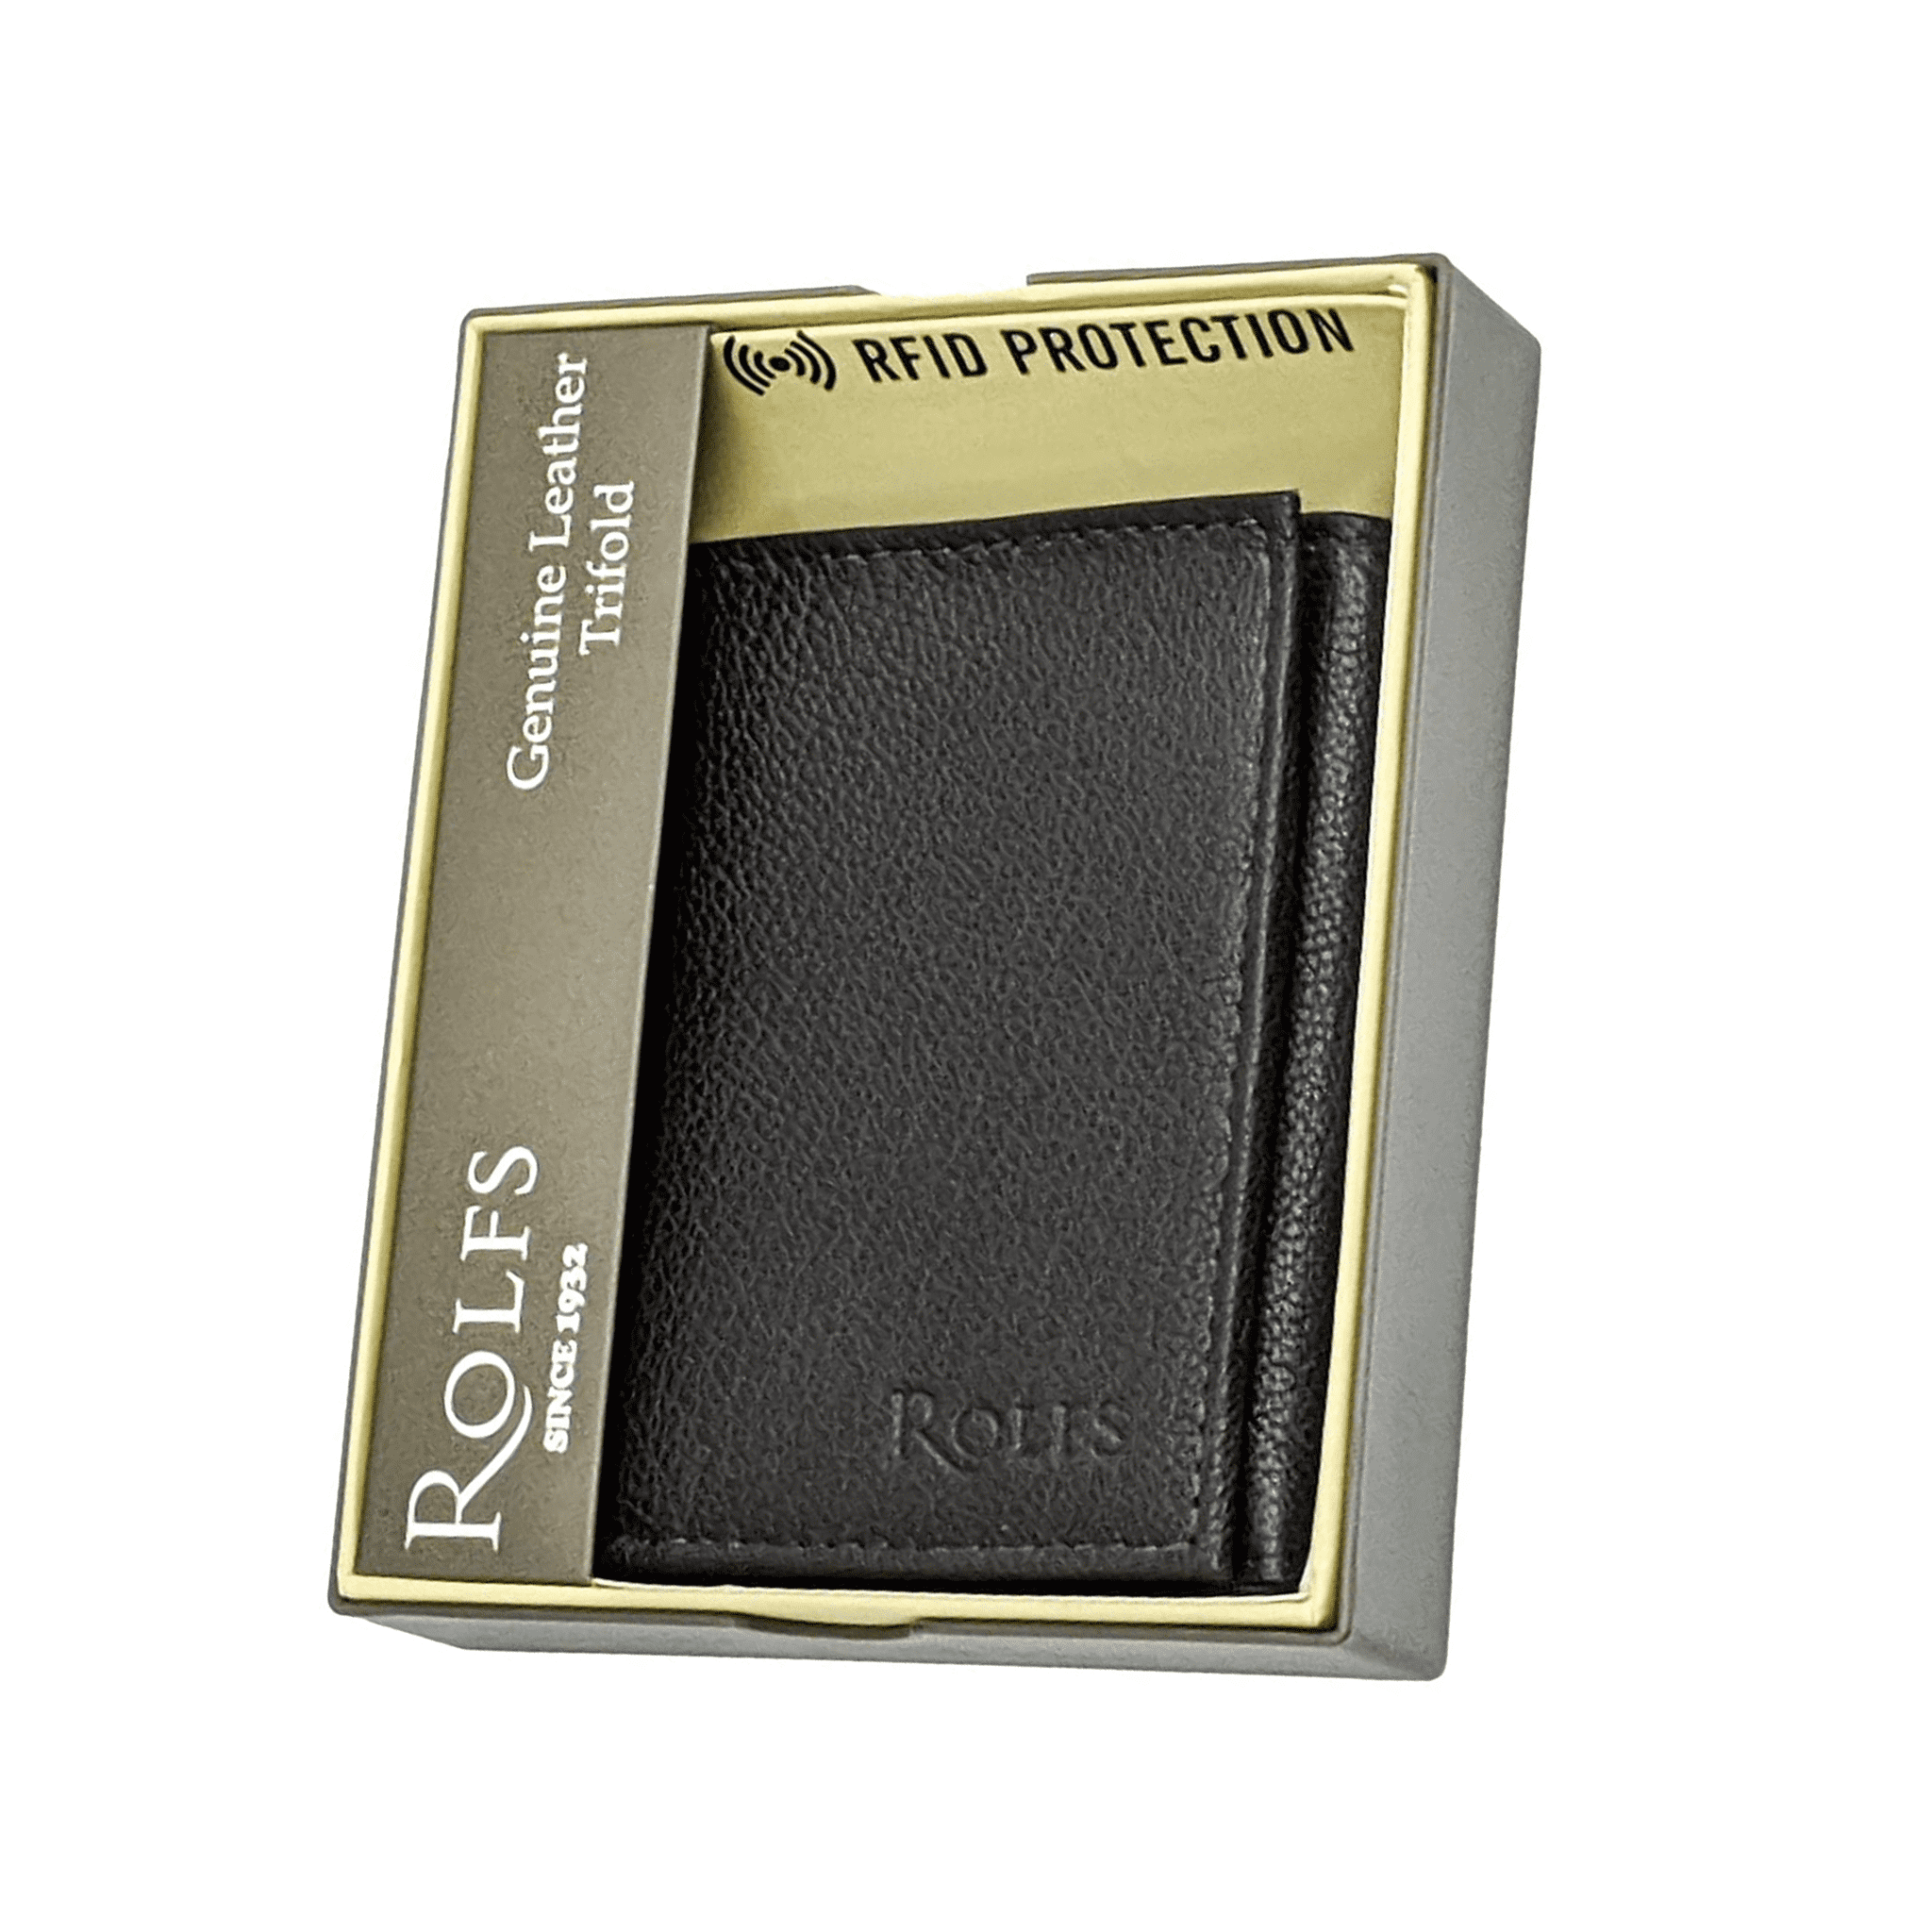 Compact Small Trifold Black Genuine Leather Wallet